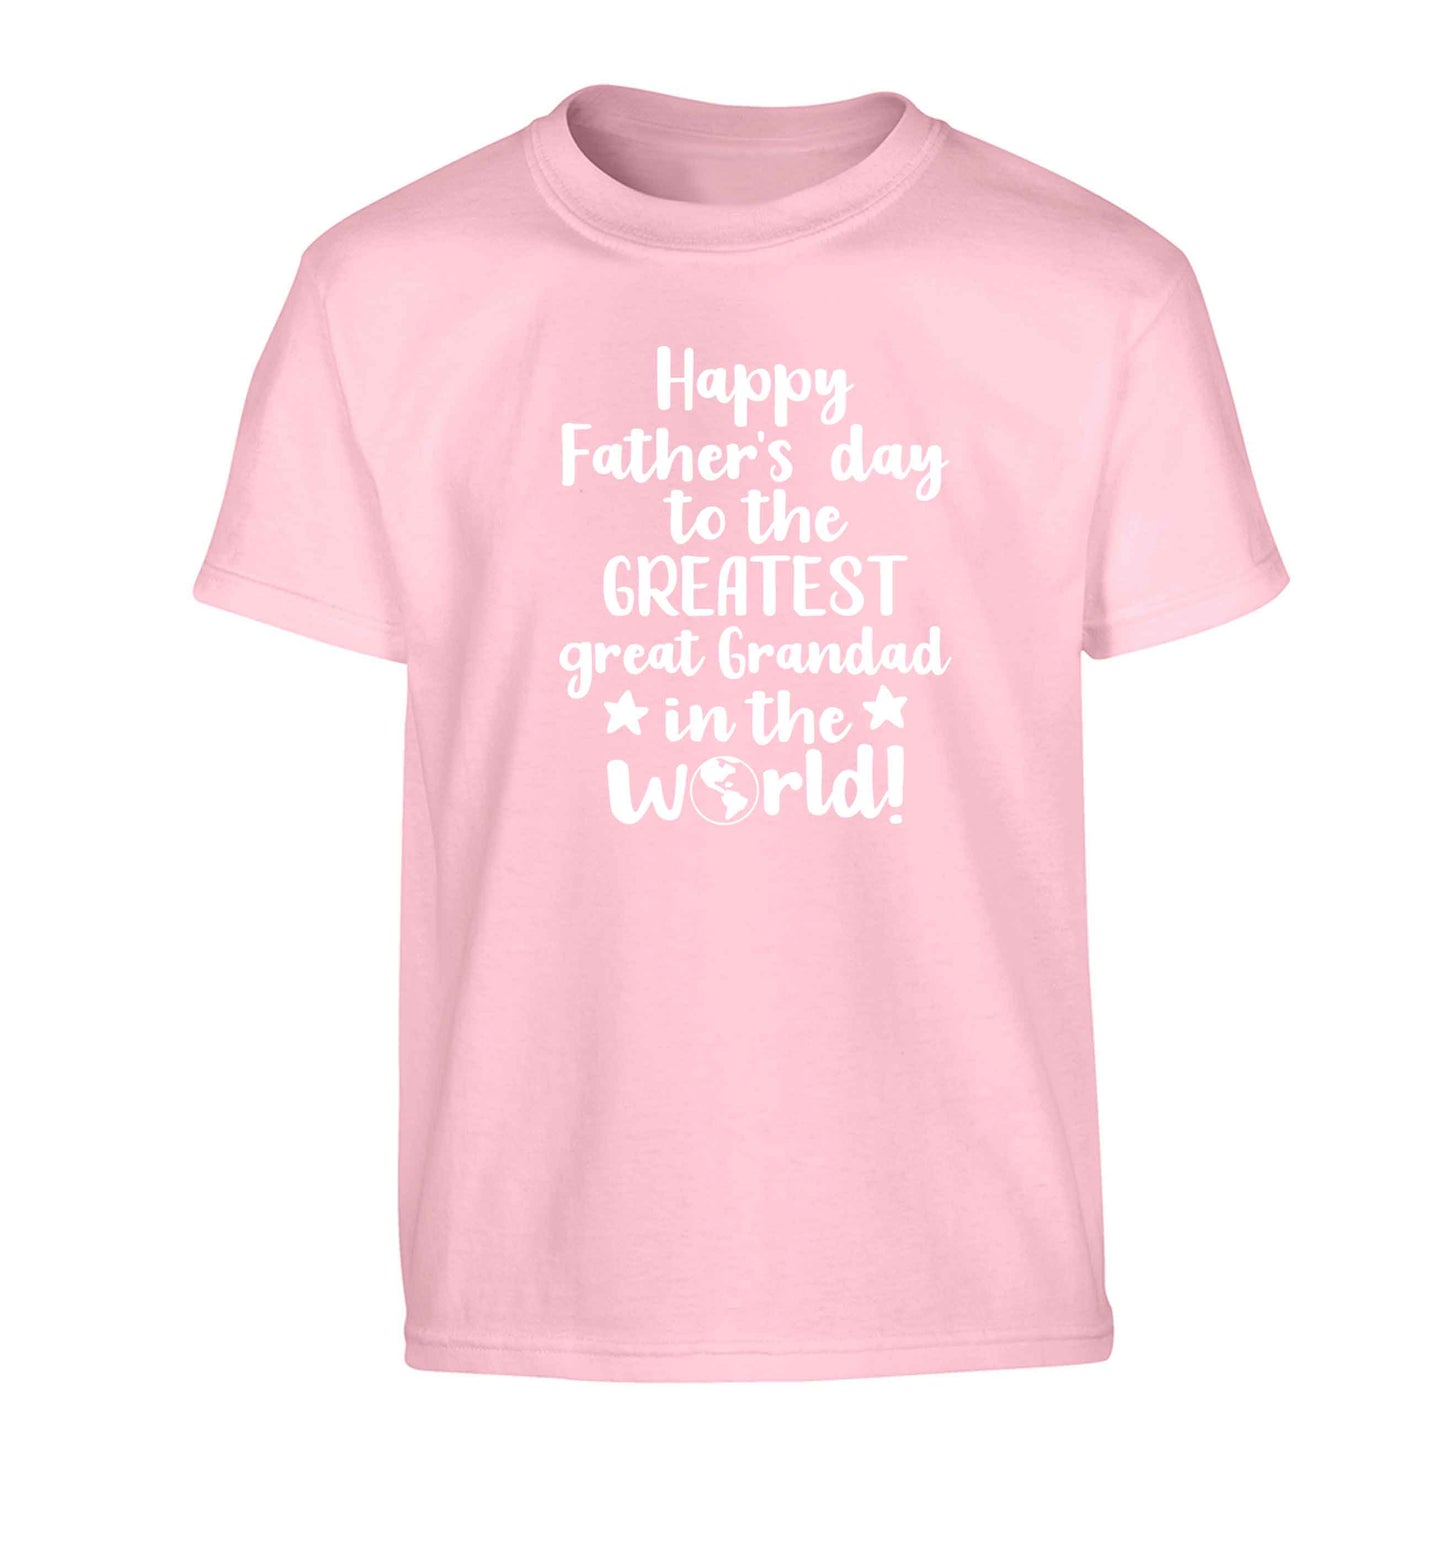 Happy Father's day to the greatest great grandad in the world Children's light pink Tshirt 12-13 Years